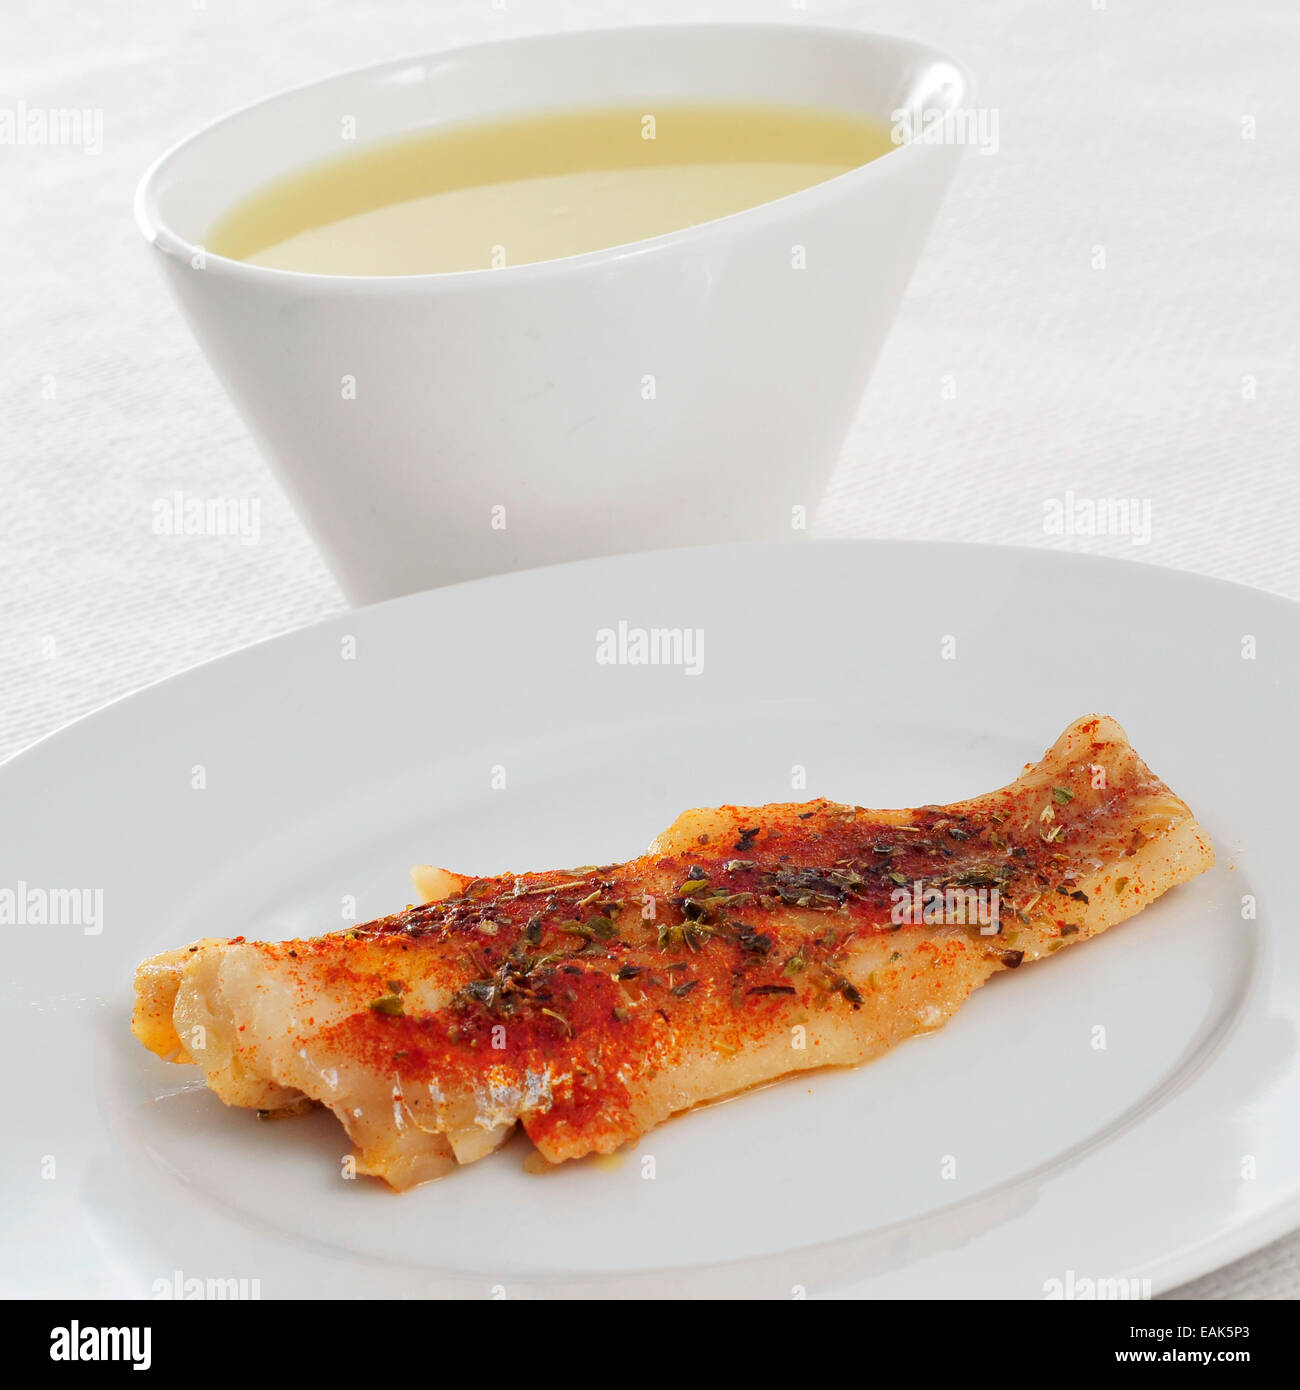 a bowl with consomme and a plate with a grilled hake fillet on a set table Stock Photo